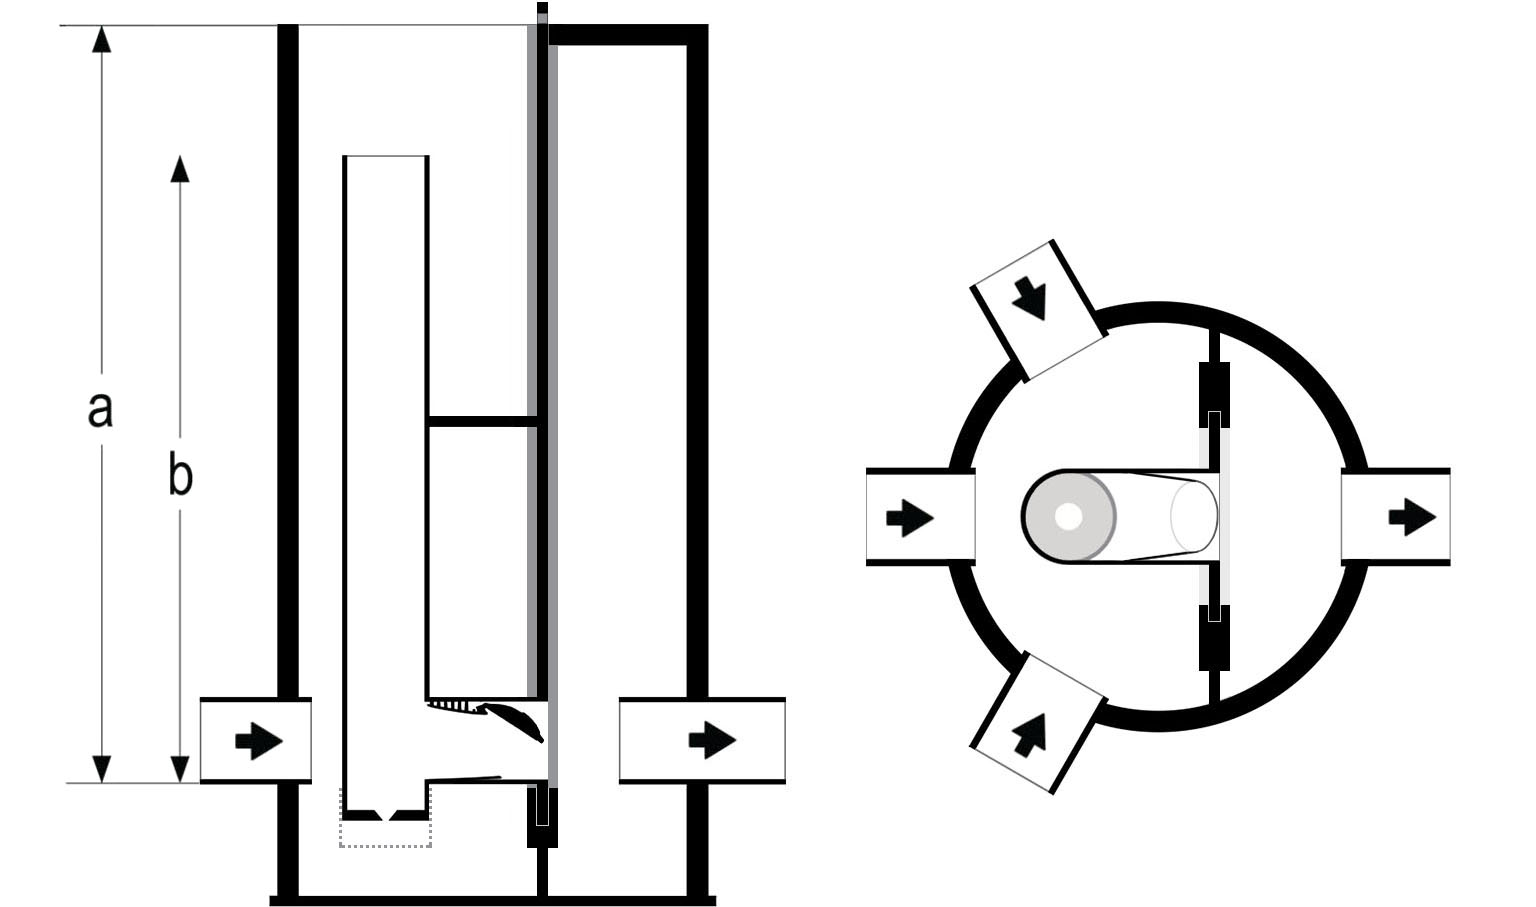 A drawing of a Controflow Combi in section and plan view